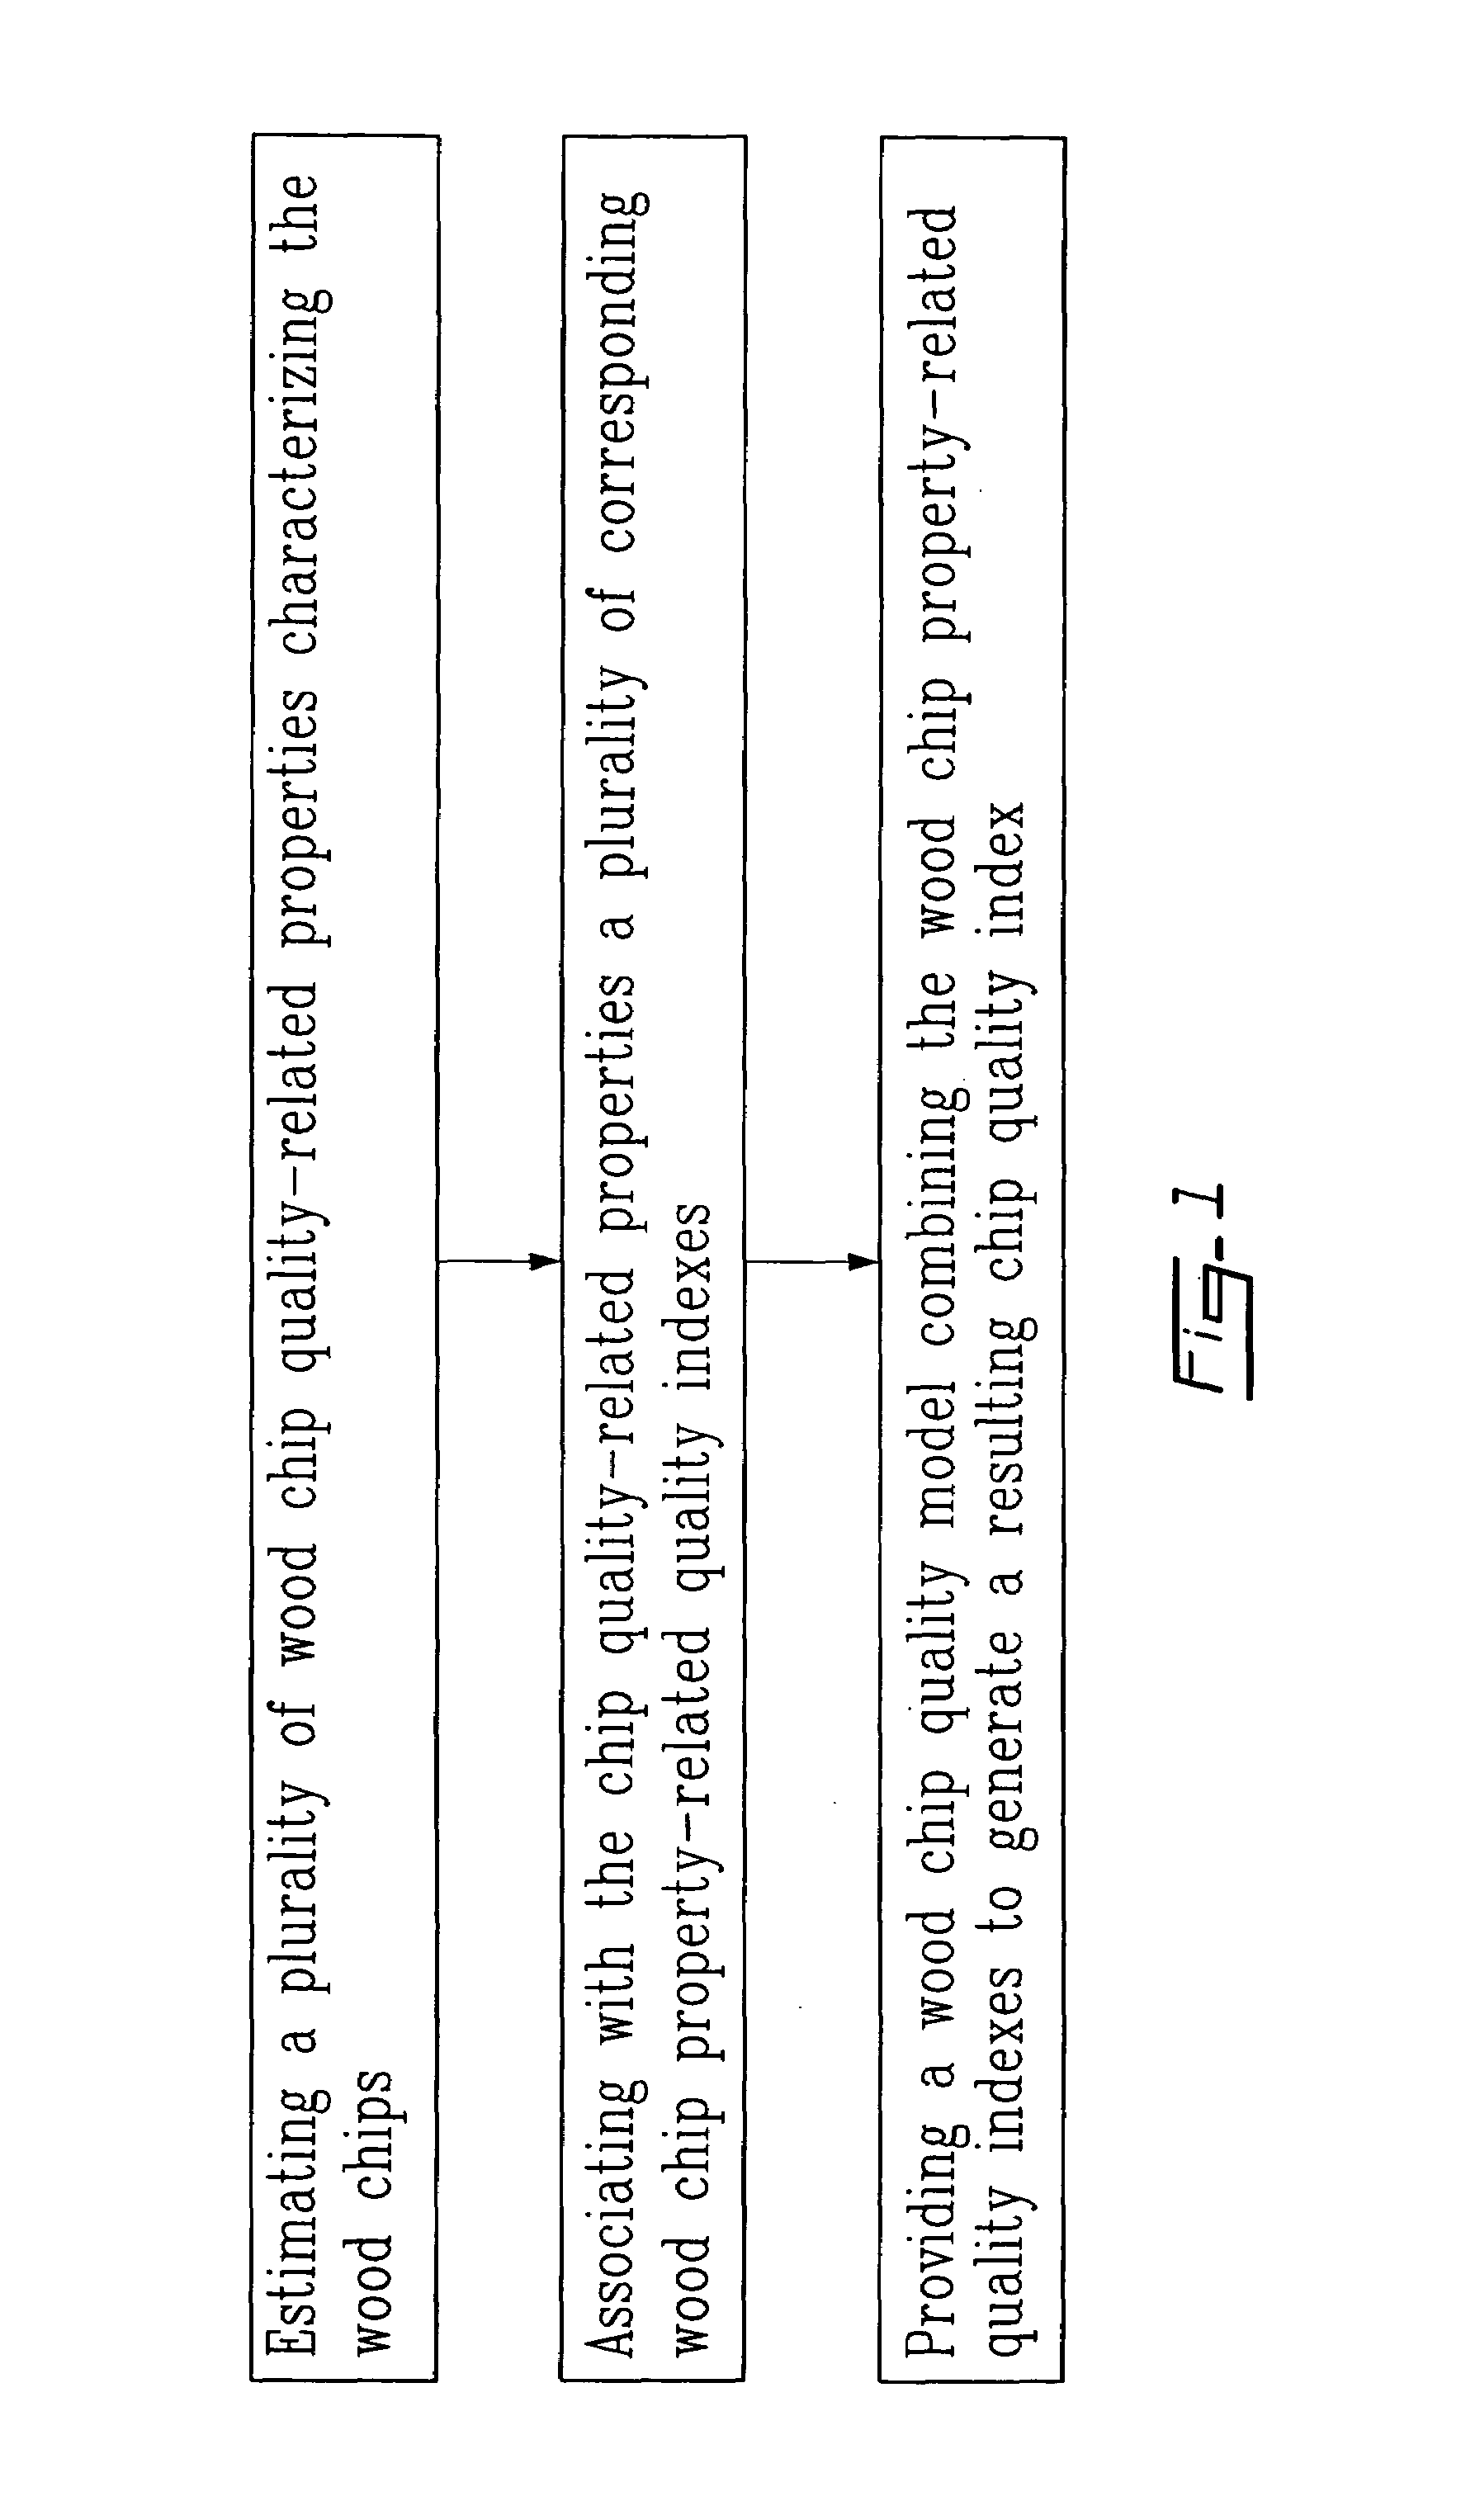 Method and apparatus for estimating surface moisture content of wood chips